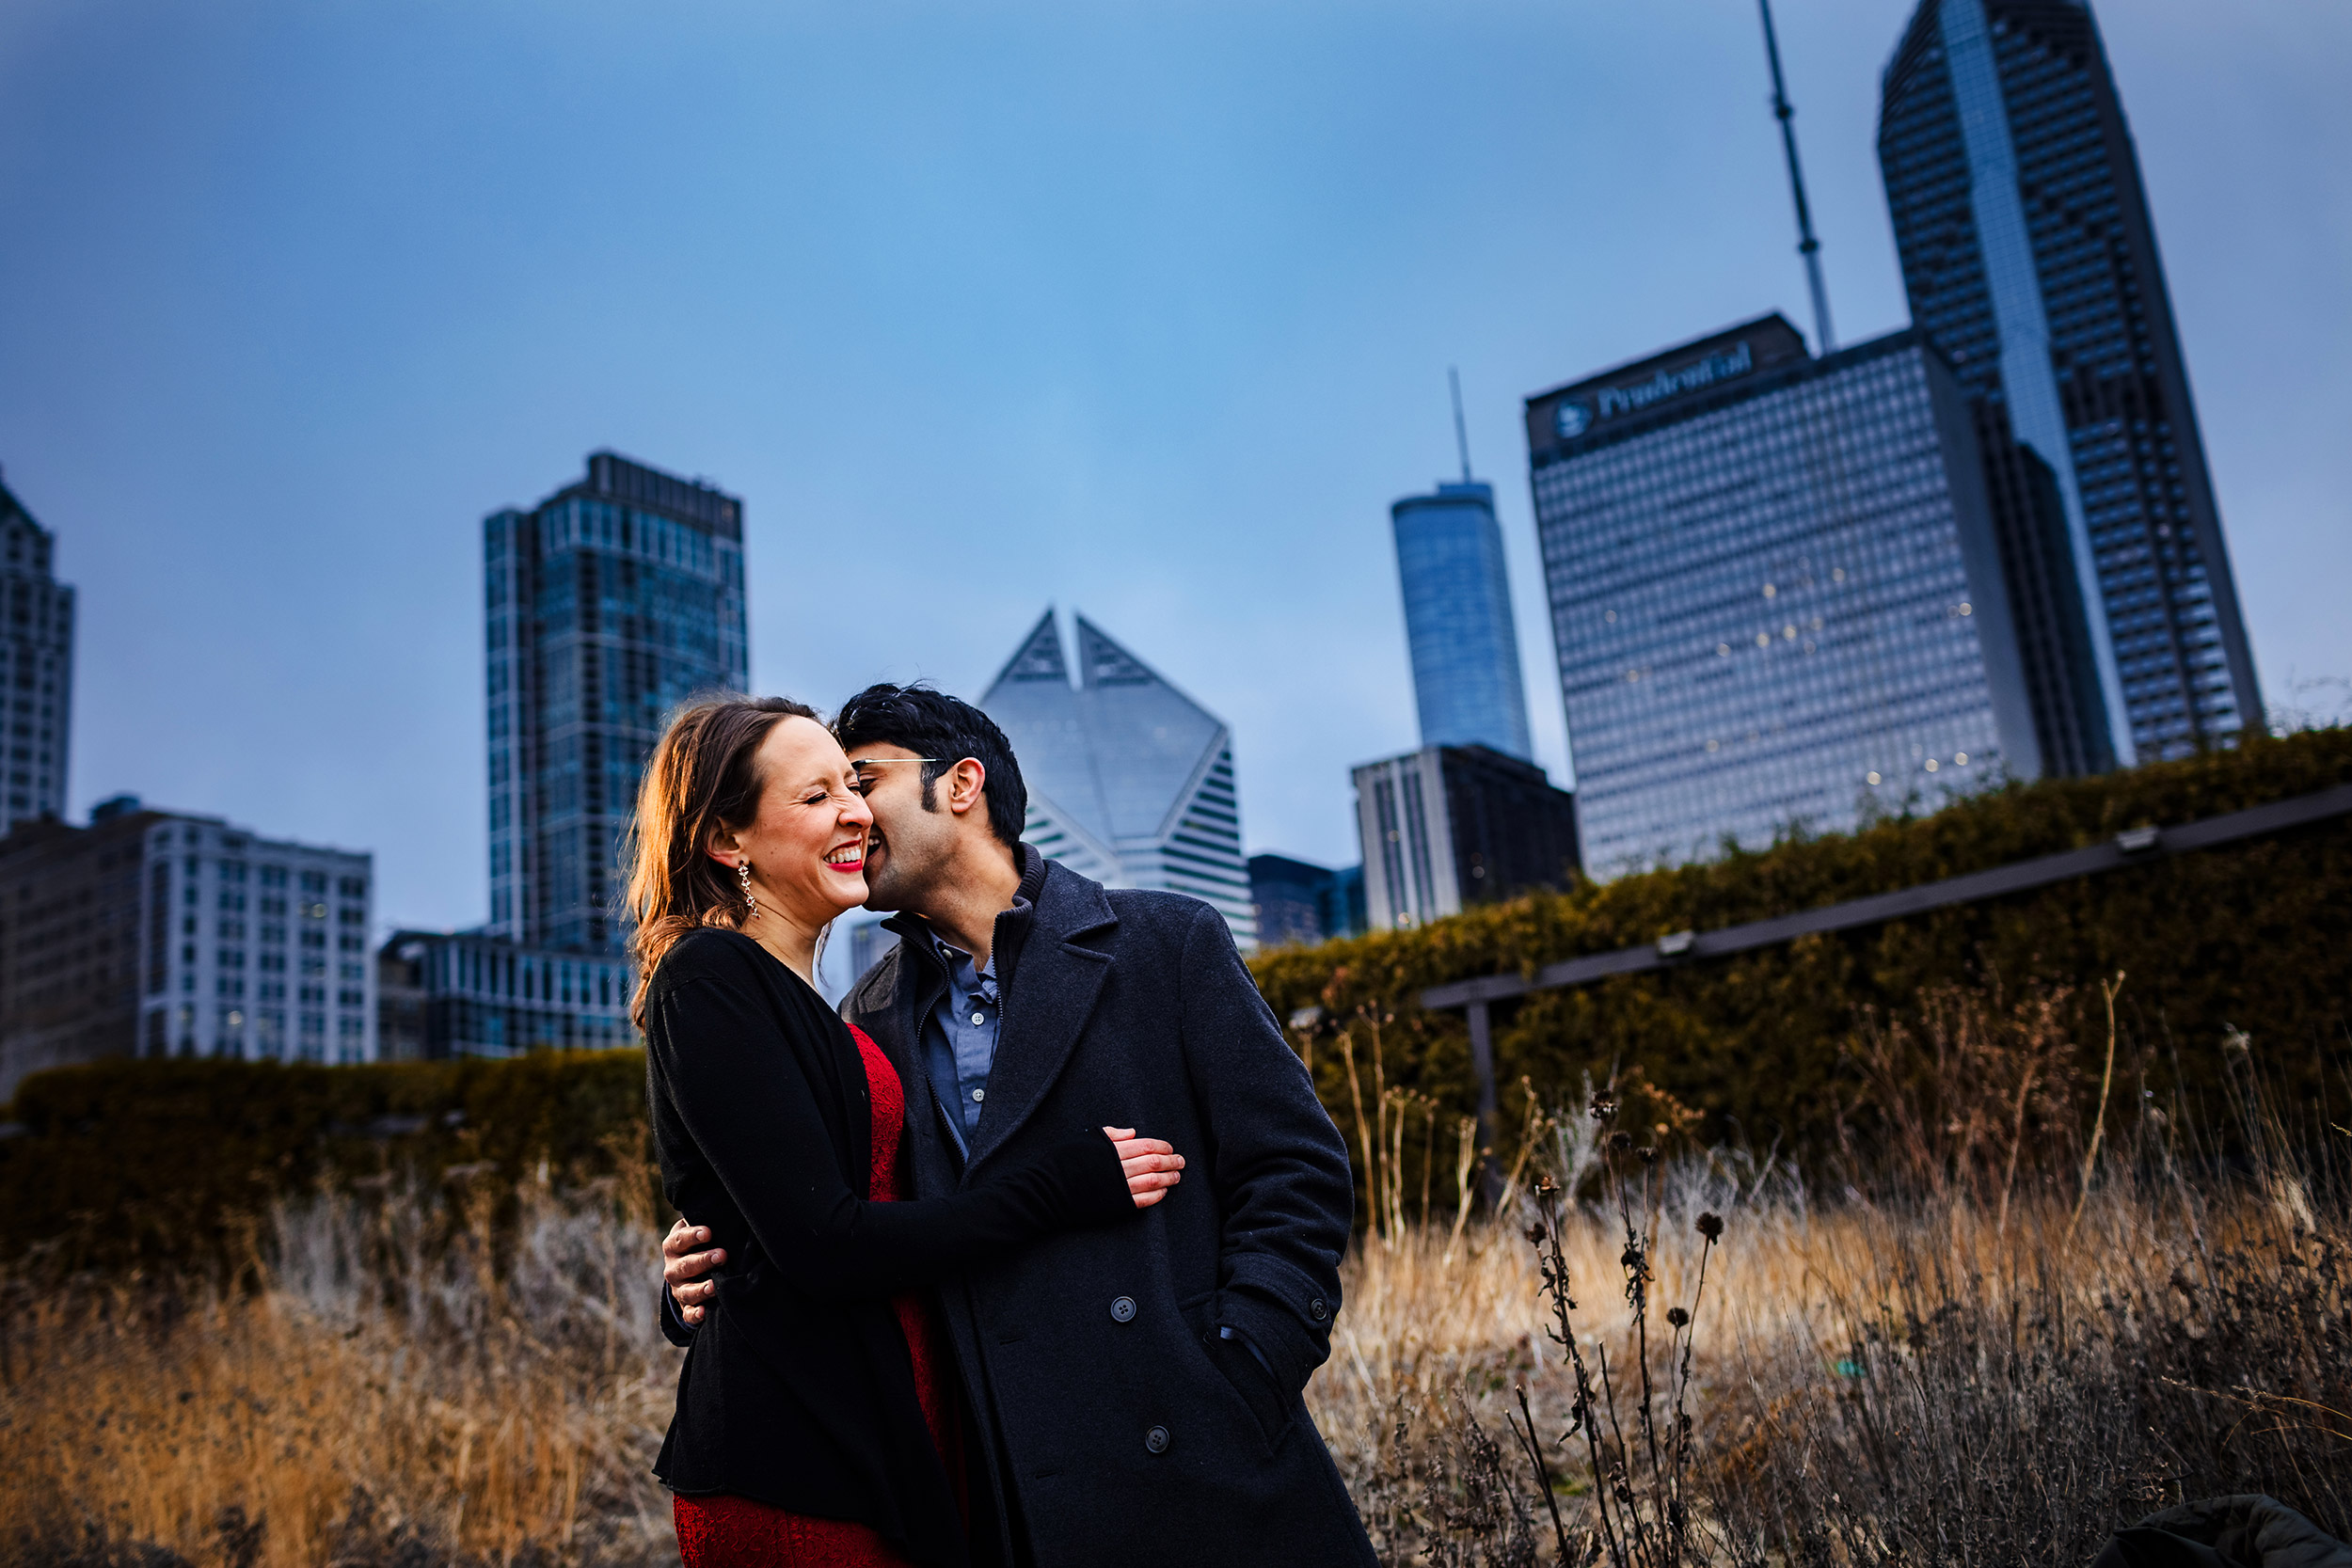 A couple shares a hug in Lurie Gardens during an elopement in downtown Chicago.